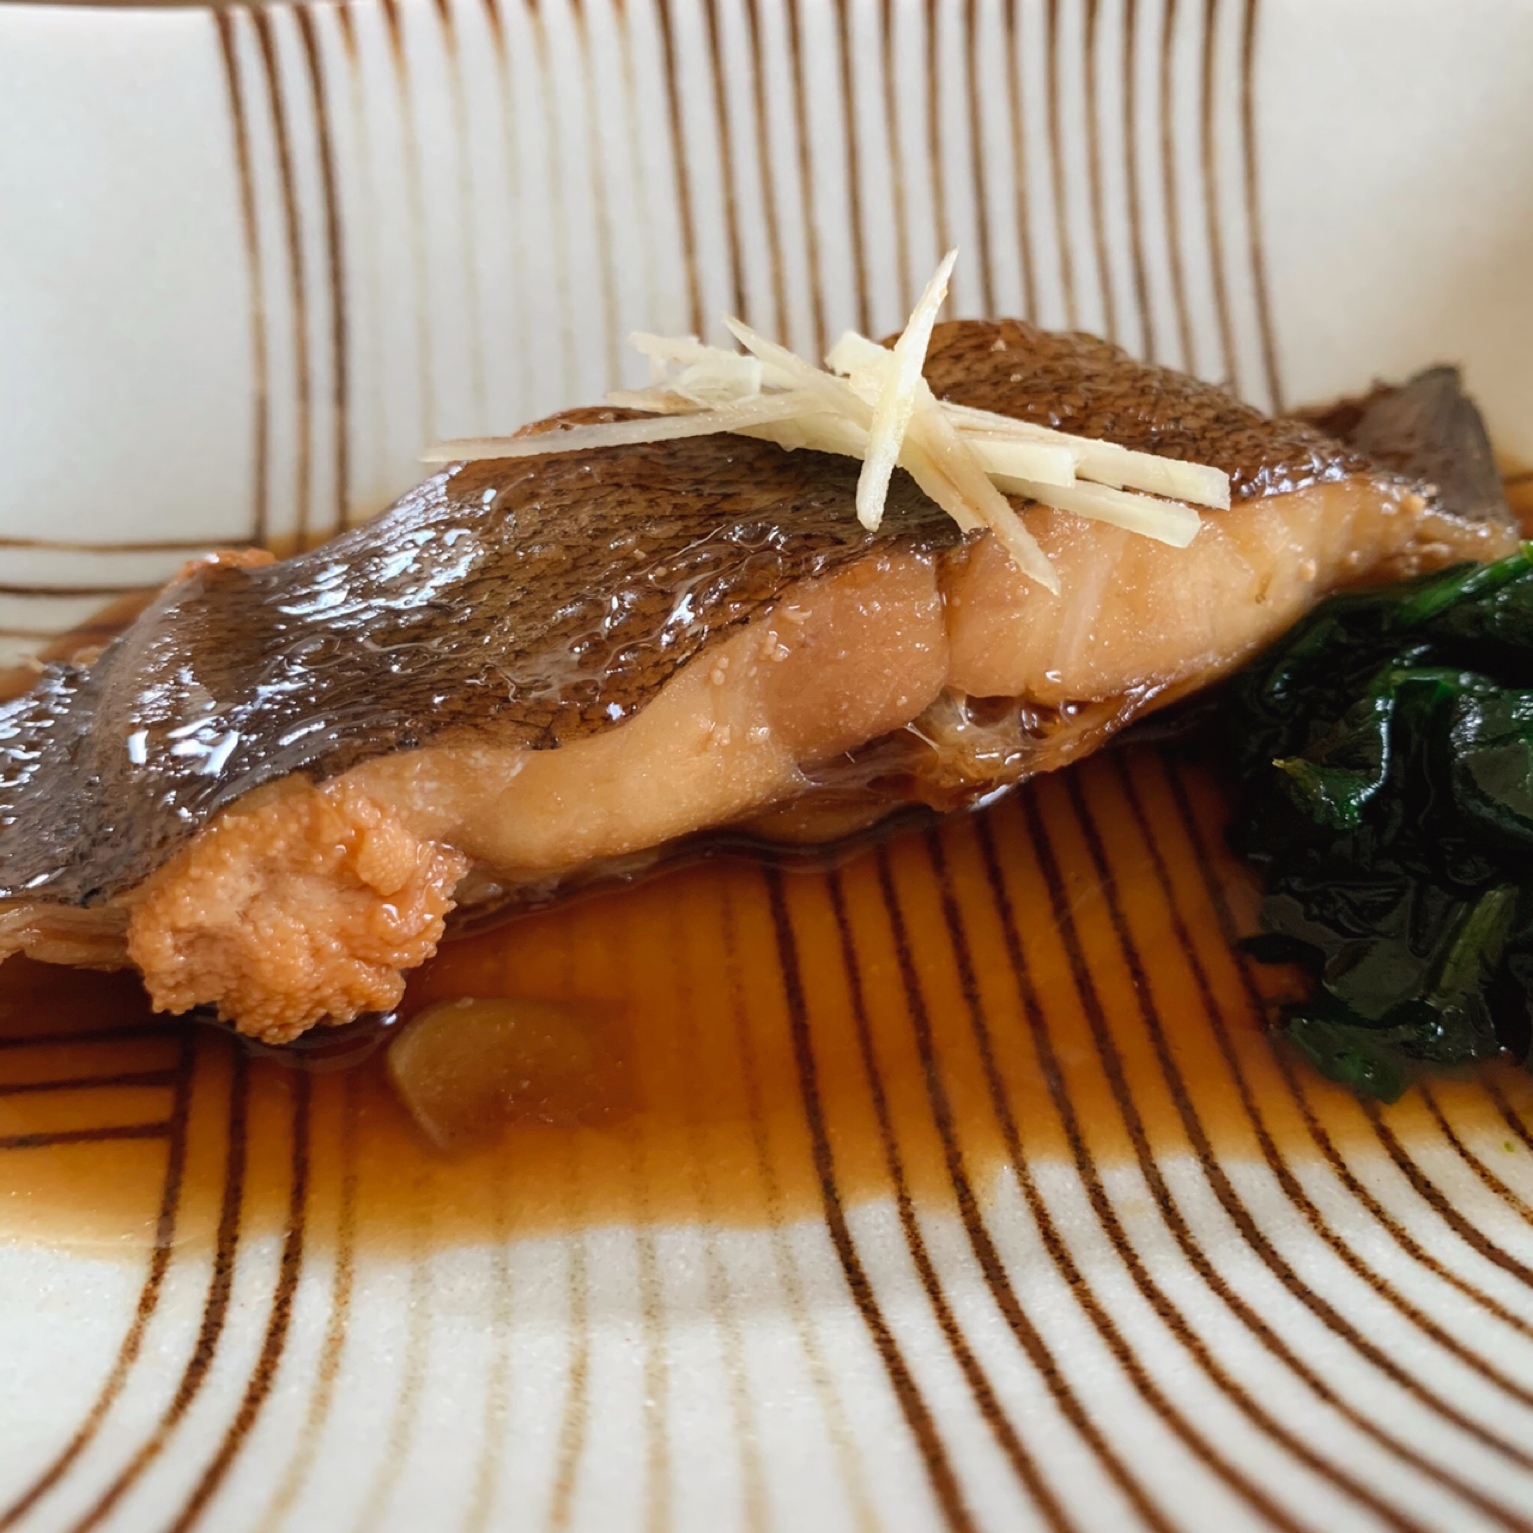 One of the representative Japanese dishes, righteye flounder is simmered in soy sauce and sugar. 